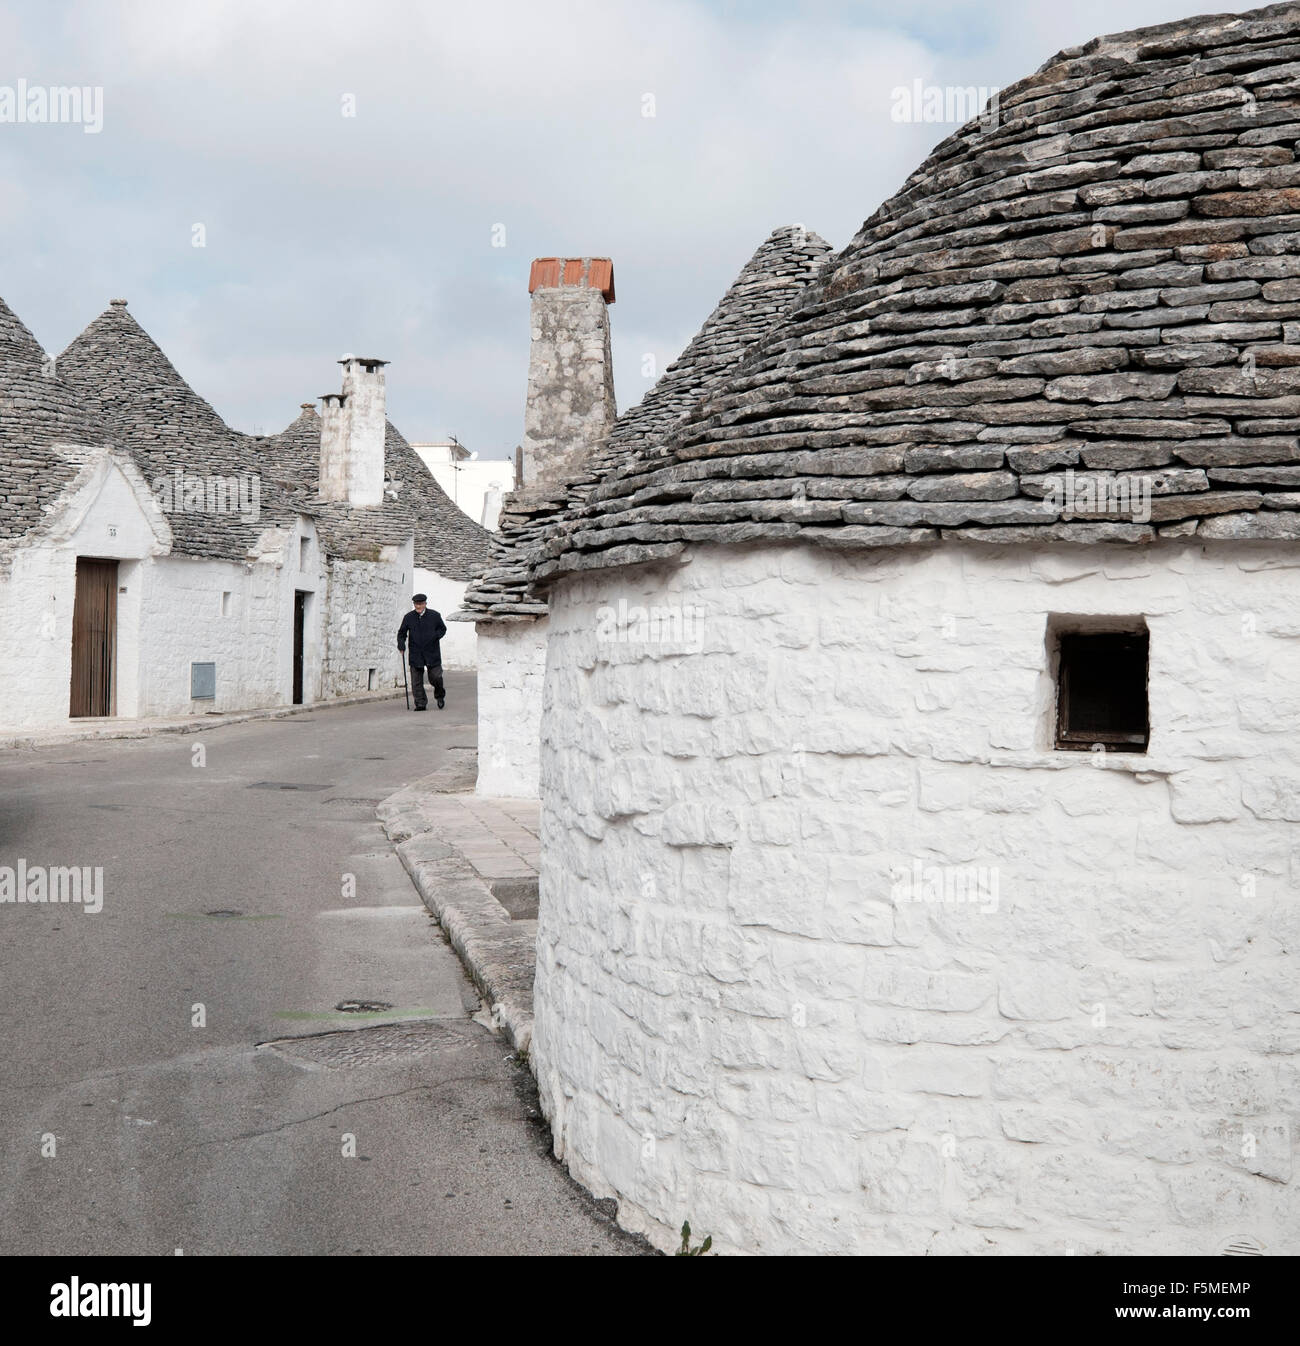 An elderly man walks down a street surrounded by the Trulli of Alberobello, Bari Province, Apuglia, Italy Stock Photo